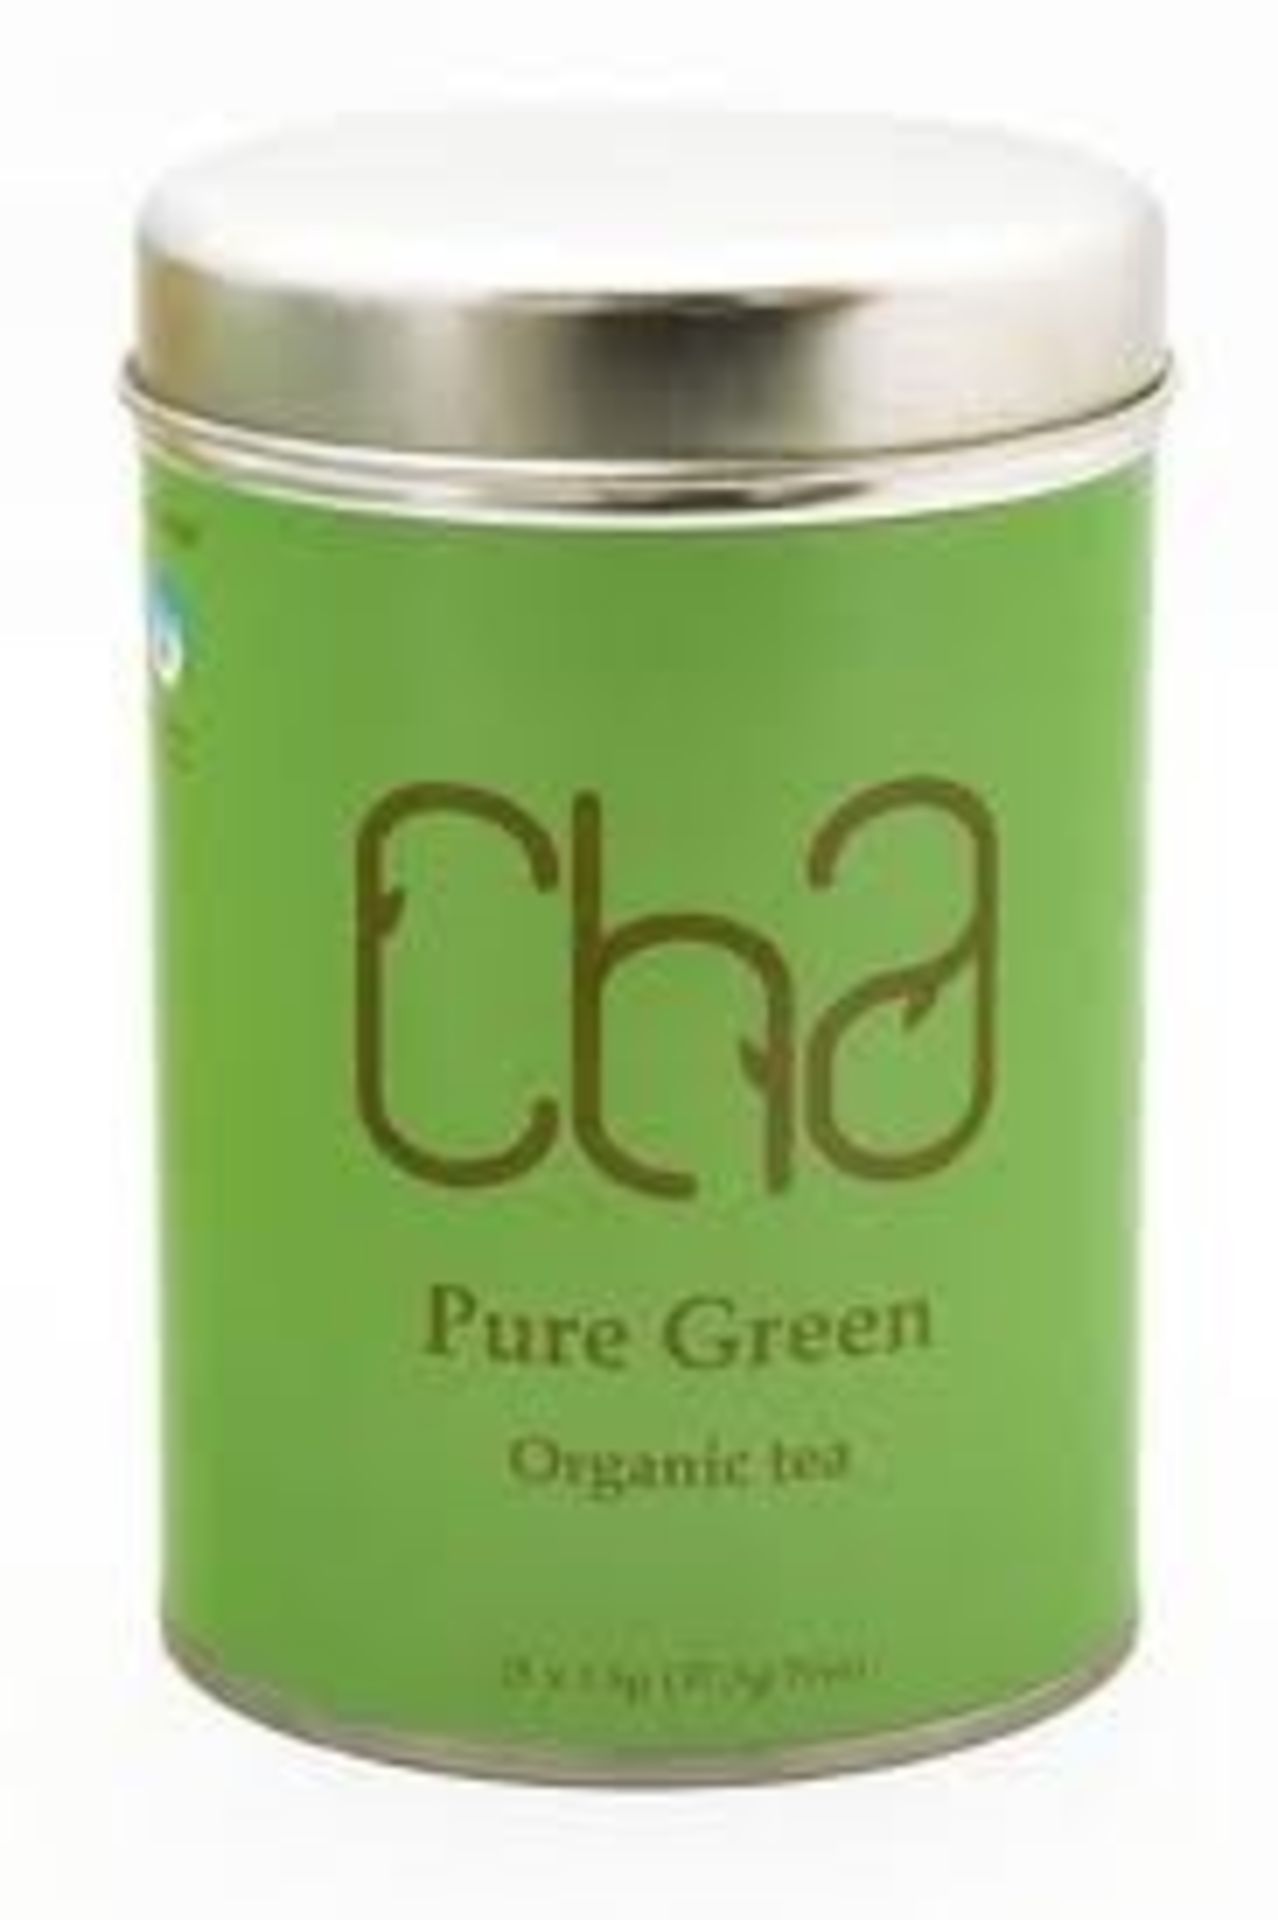 Resale Pallet - 360 x Tins of CHA Organic Tea - PURE BLACK / PURE GREEN - 100% Natural and Organic - - Image 2 of 5